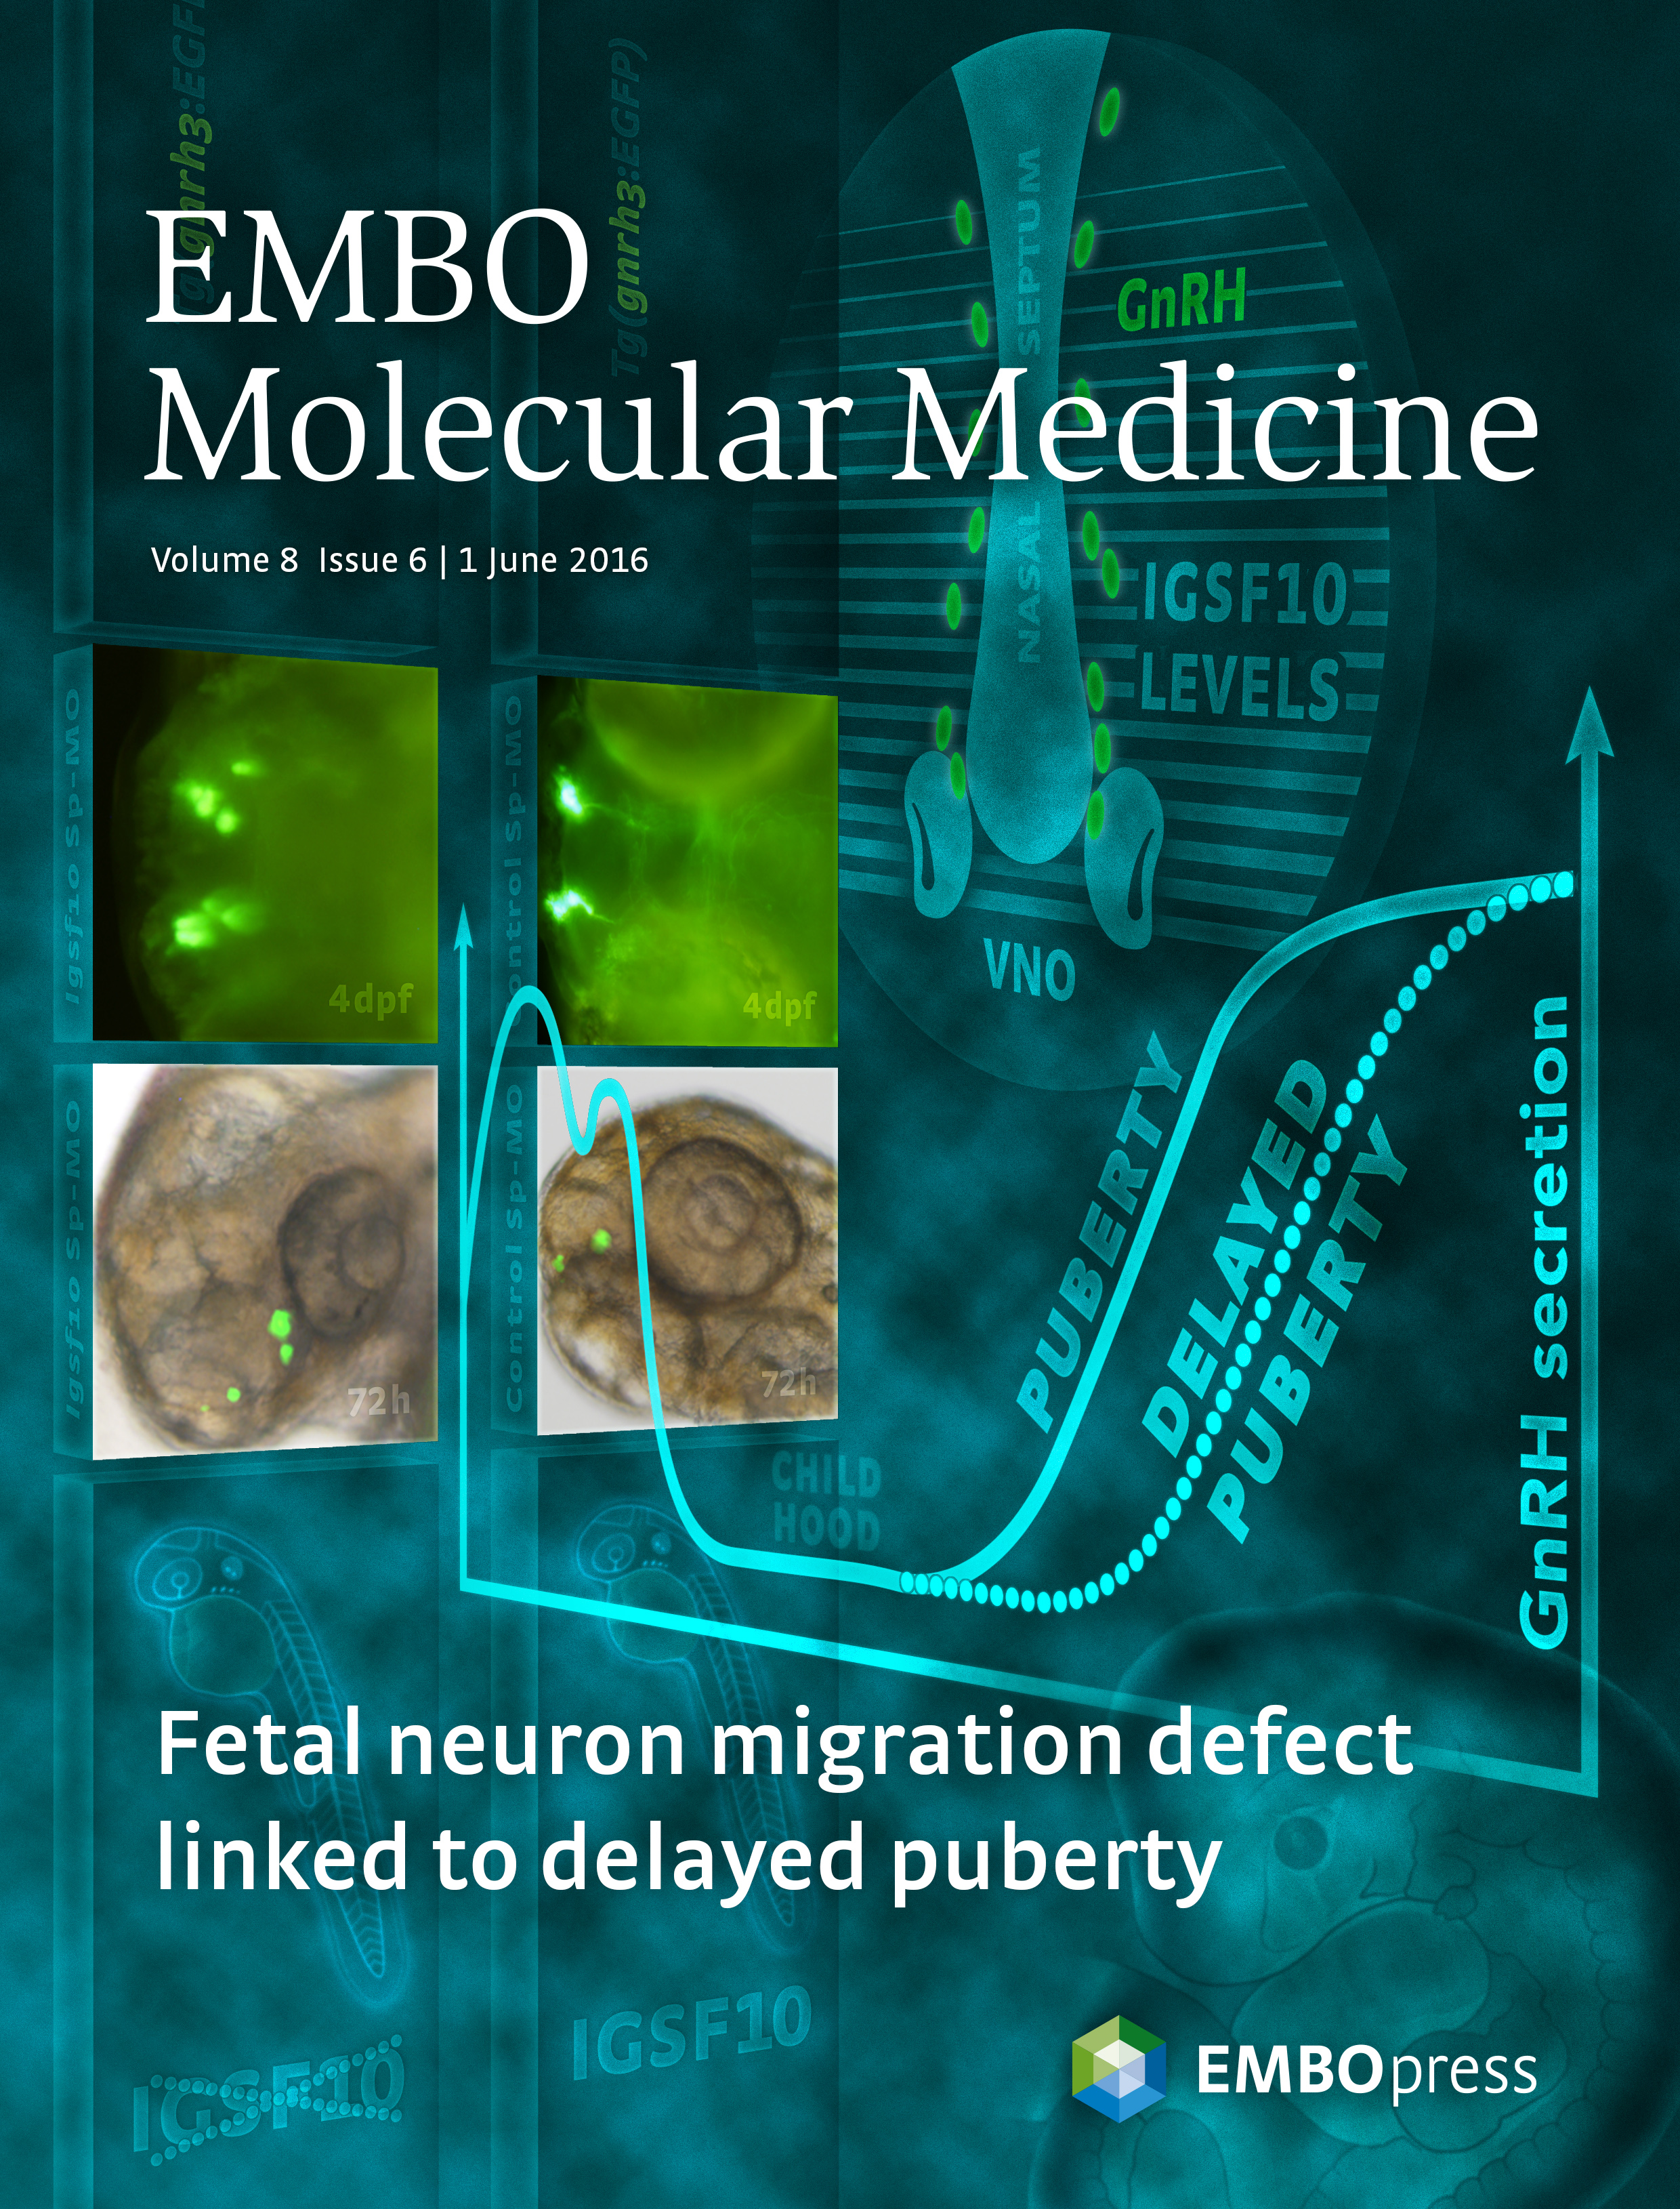 Cover image for EMBO MM journal showing IGSF10 role in neuronal migration